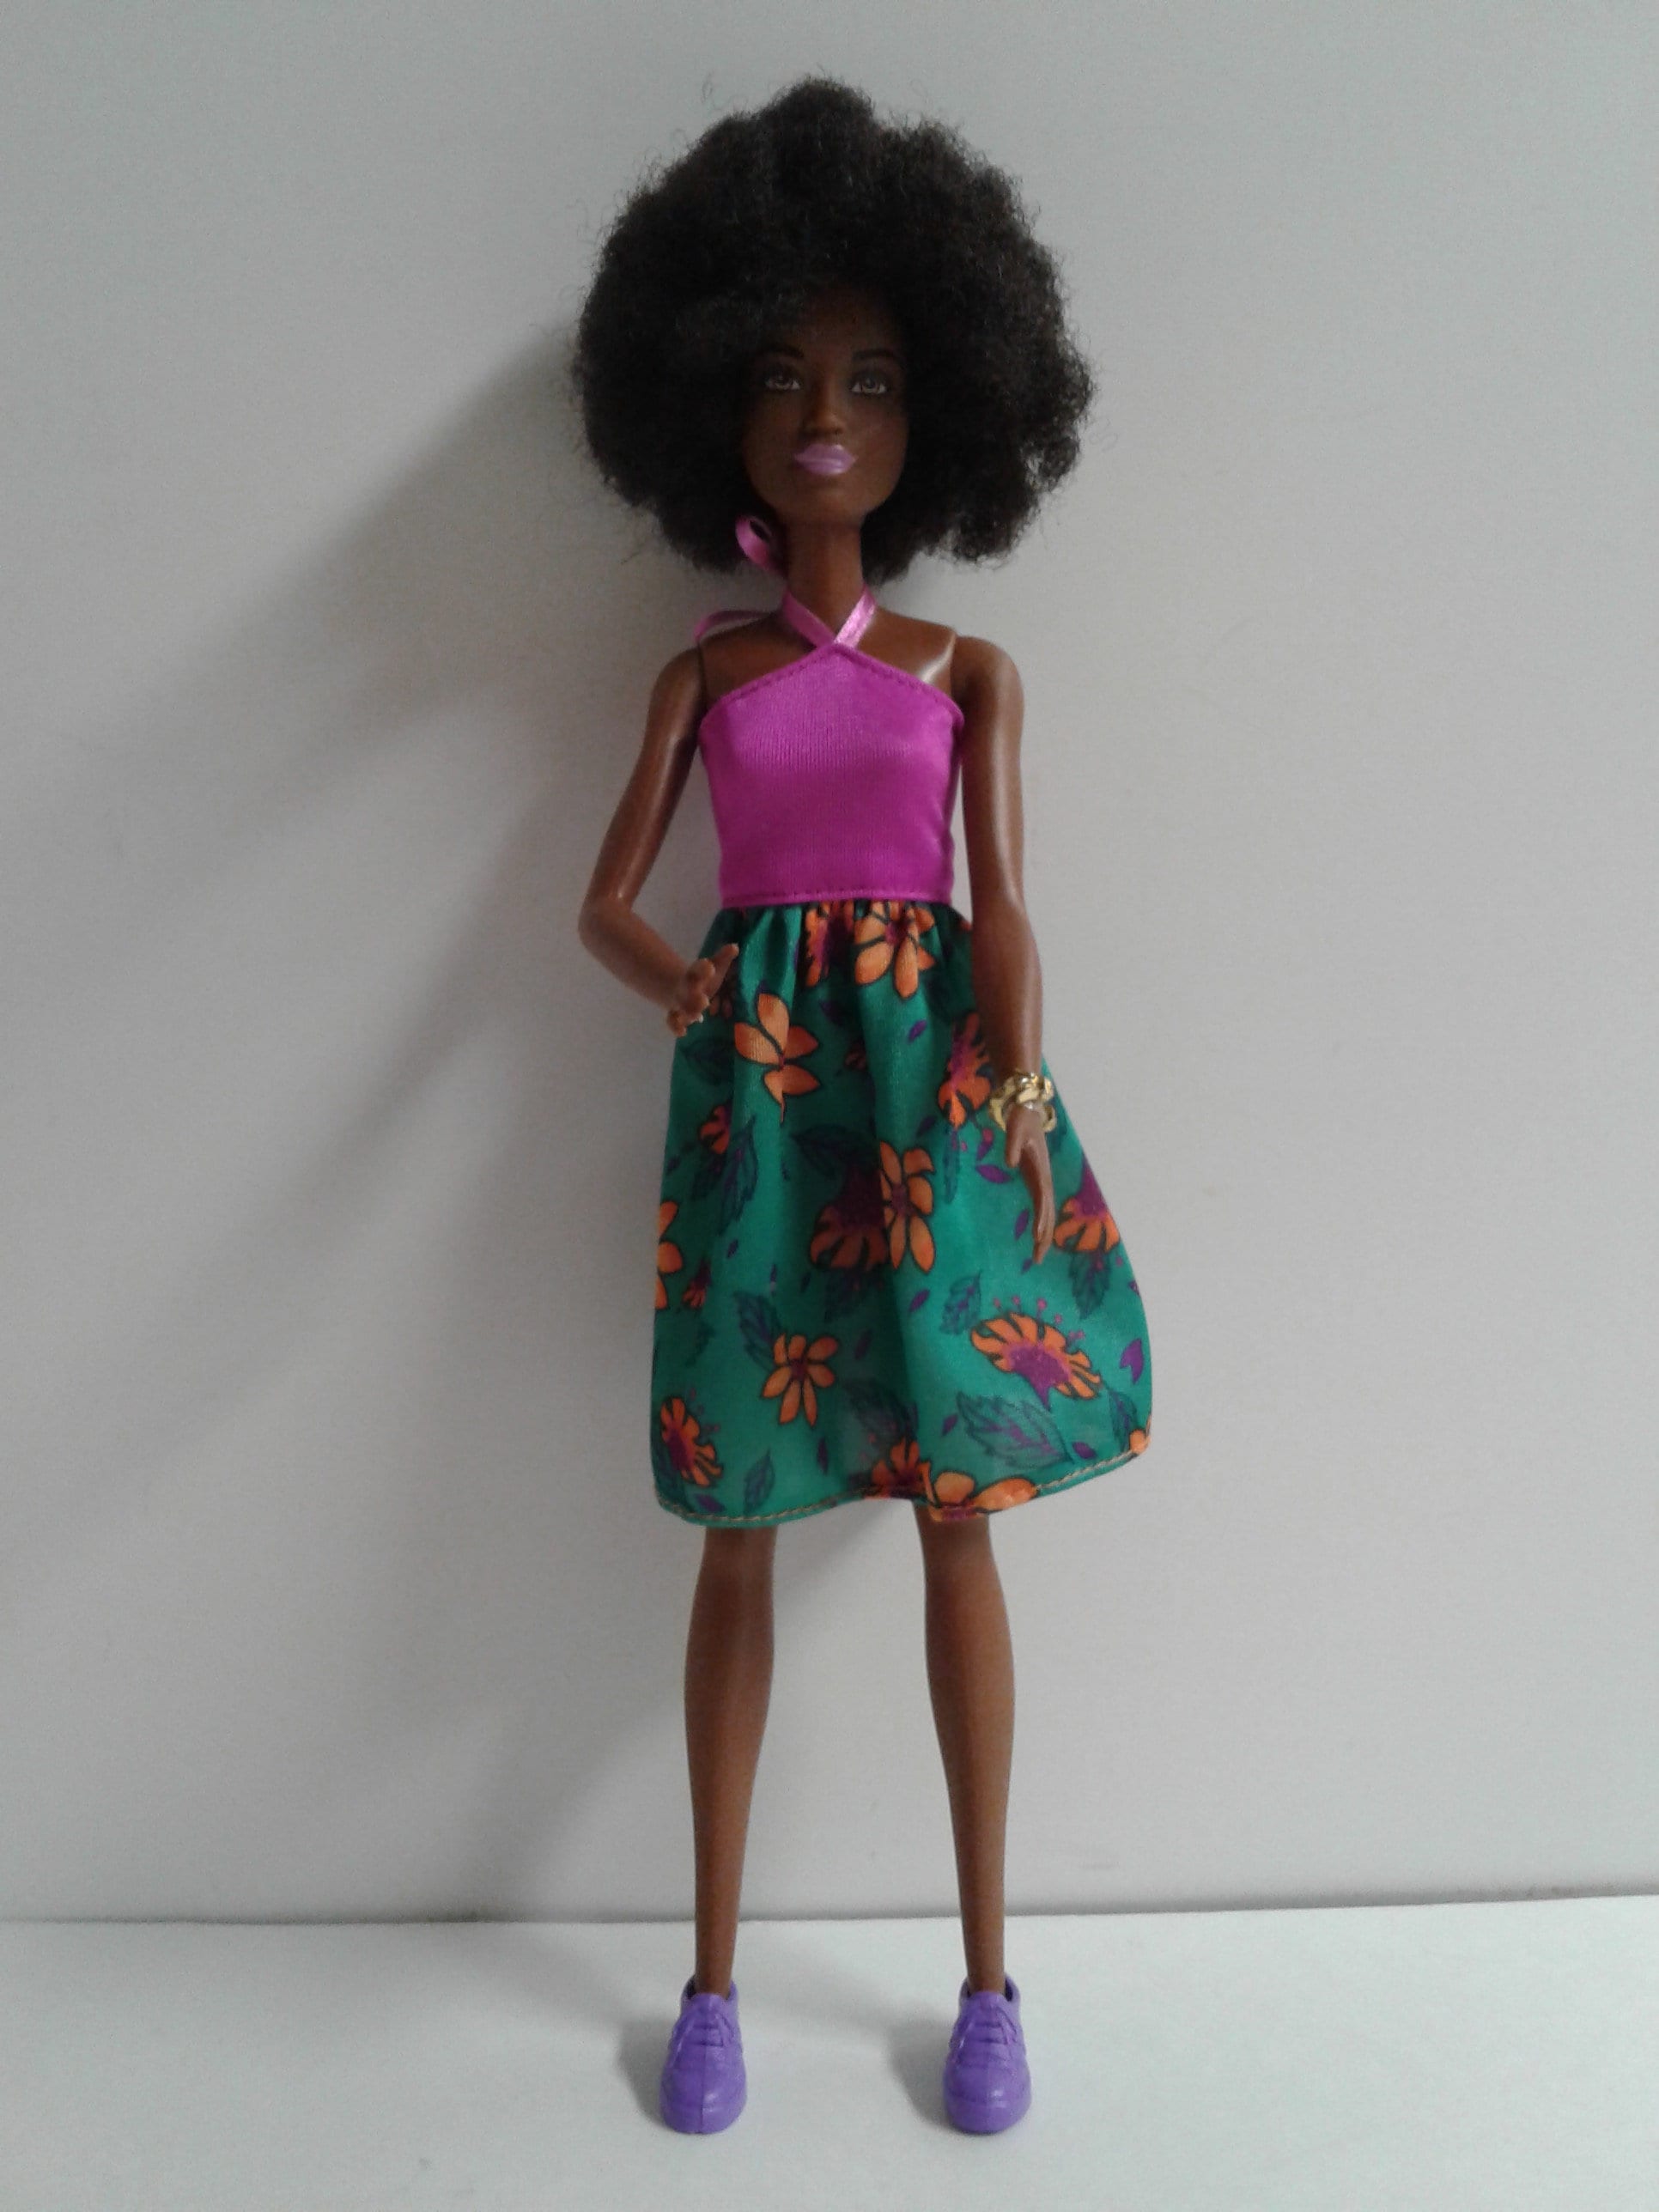 Periodic support Red date Black African American Barbie Doll 1186 MJ 1 NL Mattel 2015 - Etsy